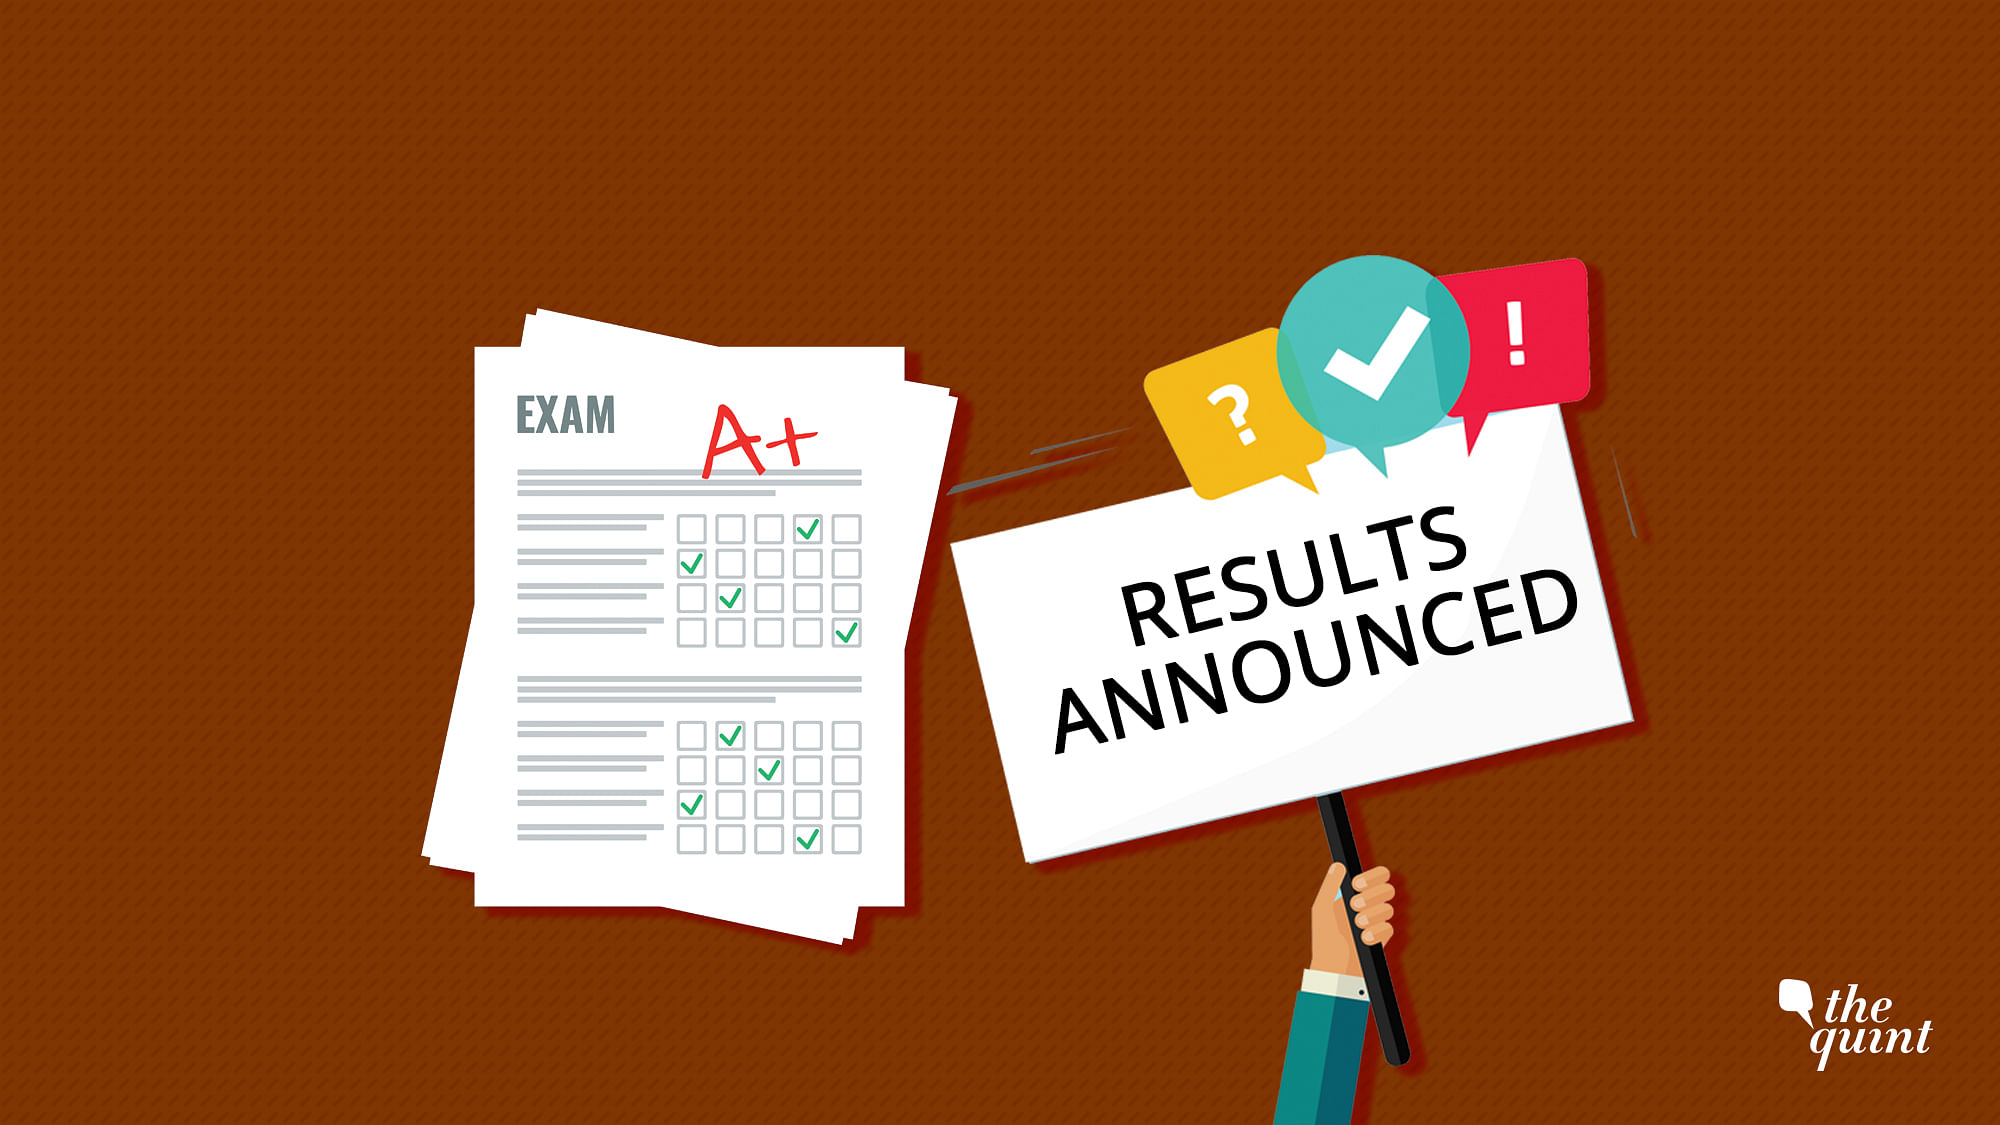 Bihar School of Open Learning Class 10,12 Exam Results Released, Direct Link Below. Image used for representation only.